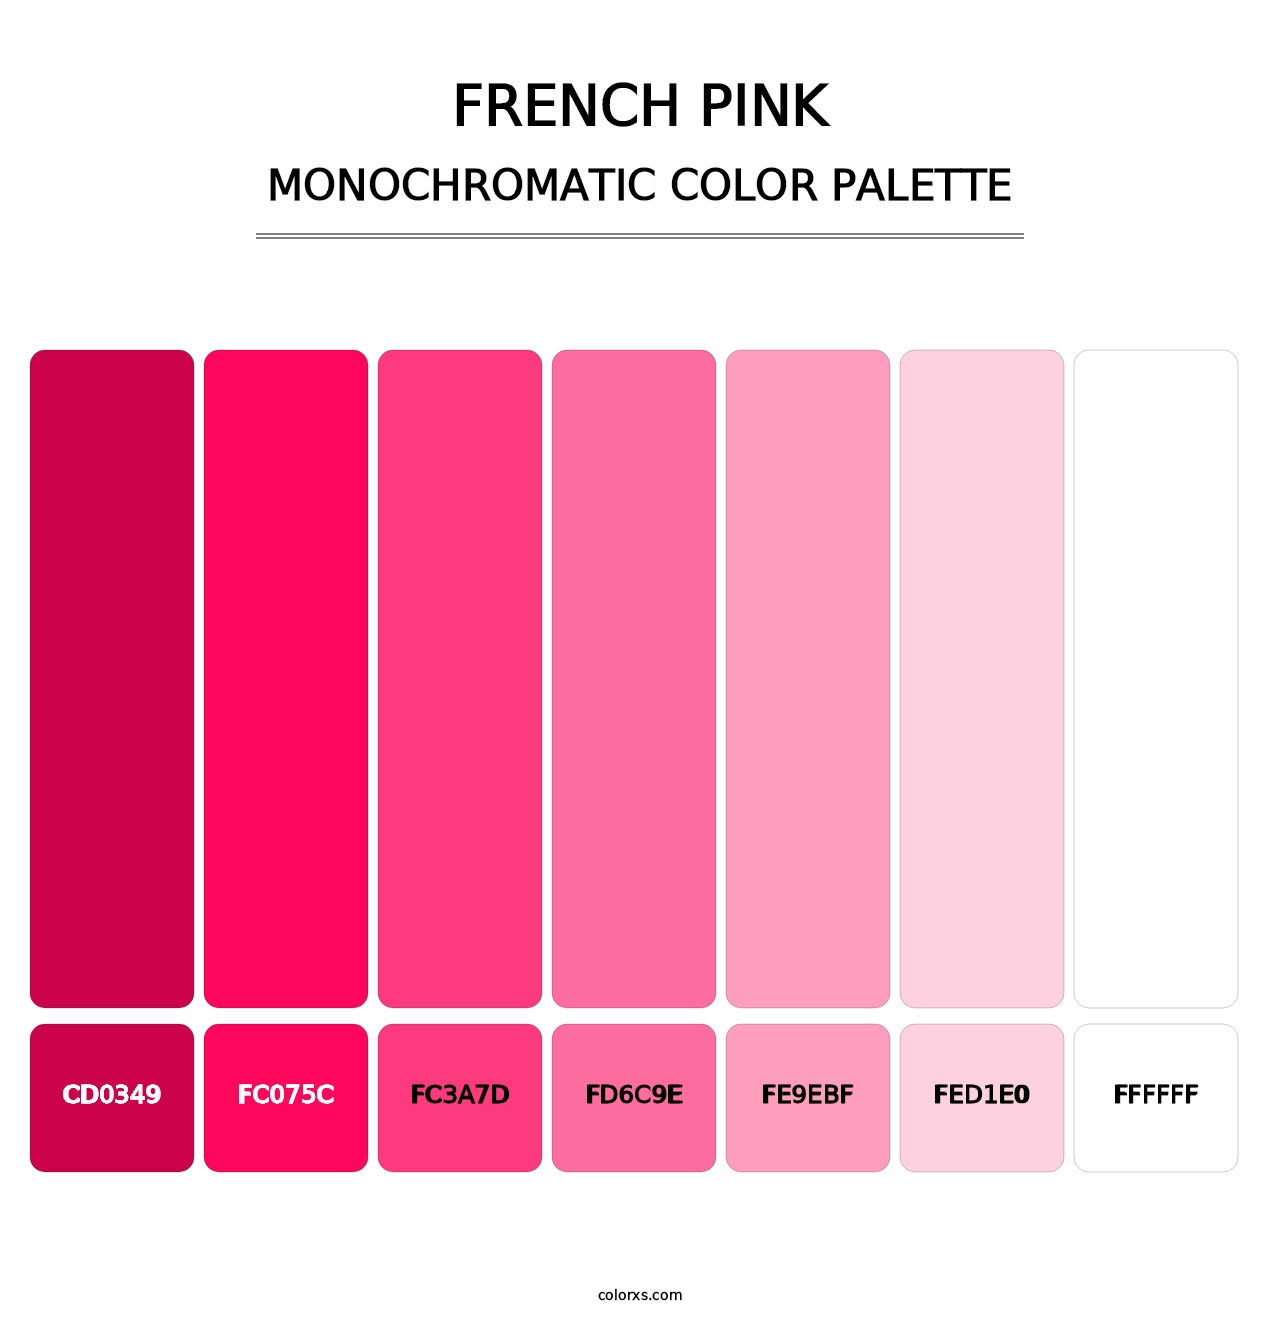 French Pink - Monochromatic Color Palette